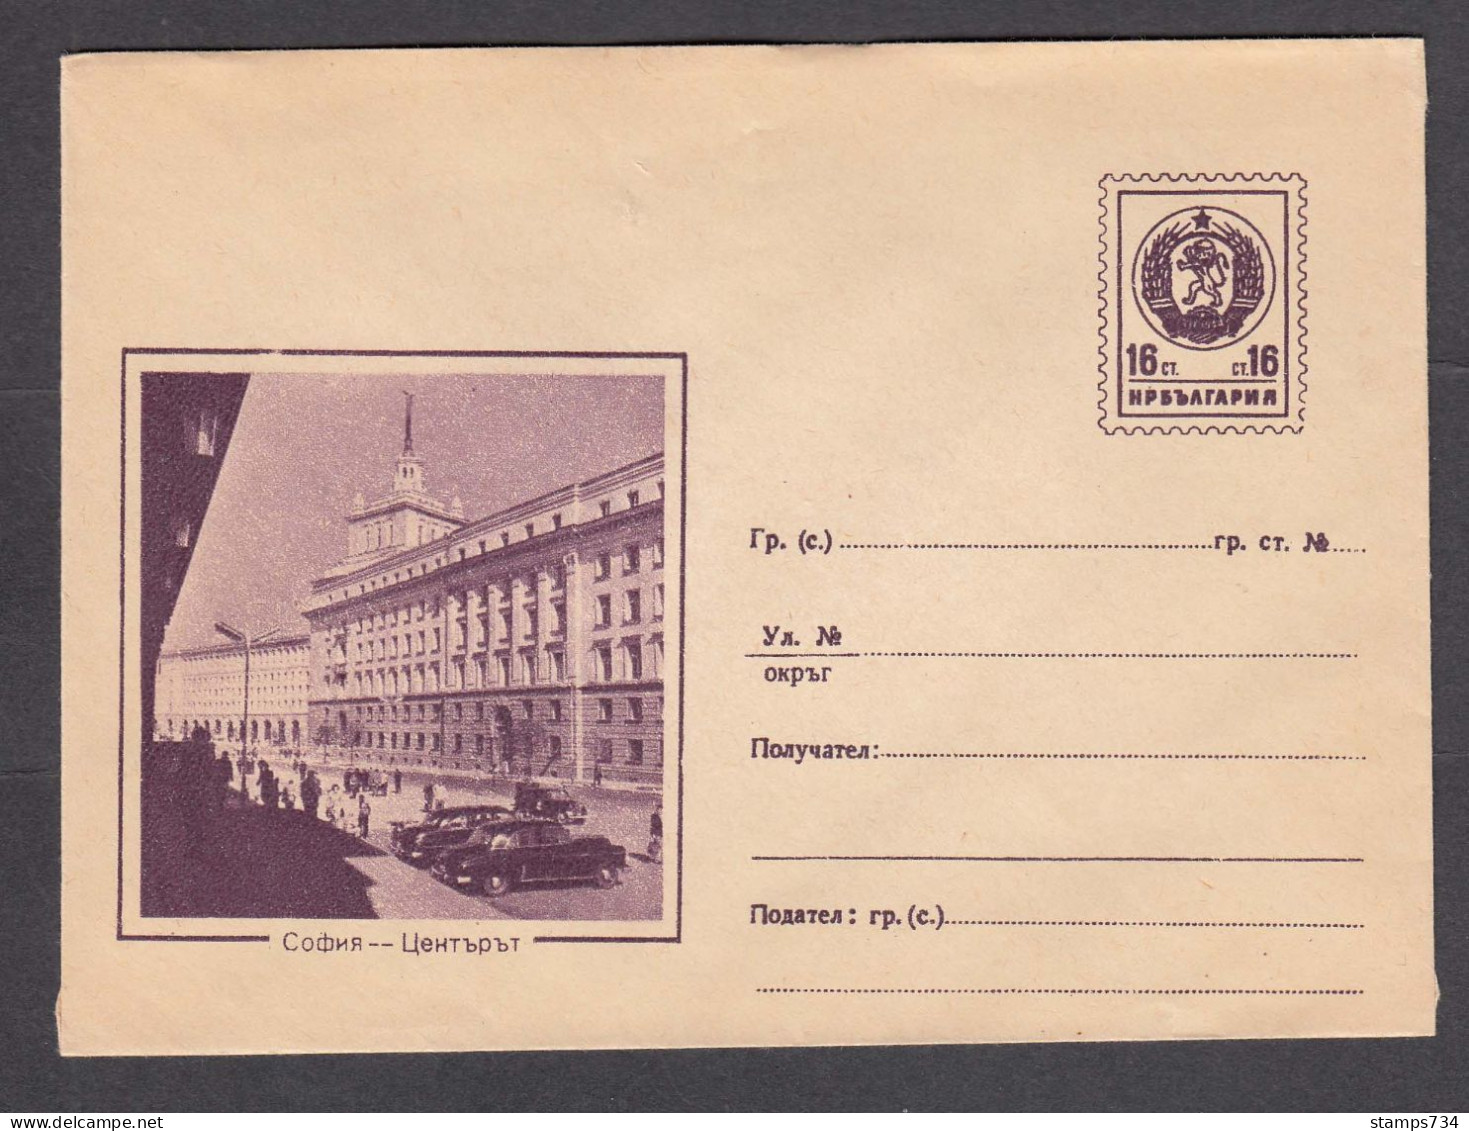 PS 237/1960 - Mint, Sofia - The Center, Autos. Post. Stationery - Bulgaria - Covers